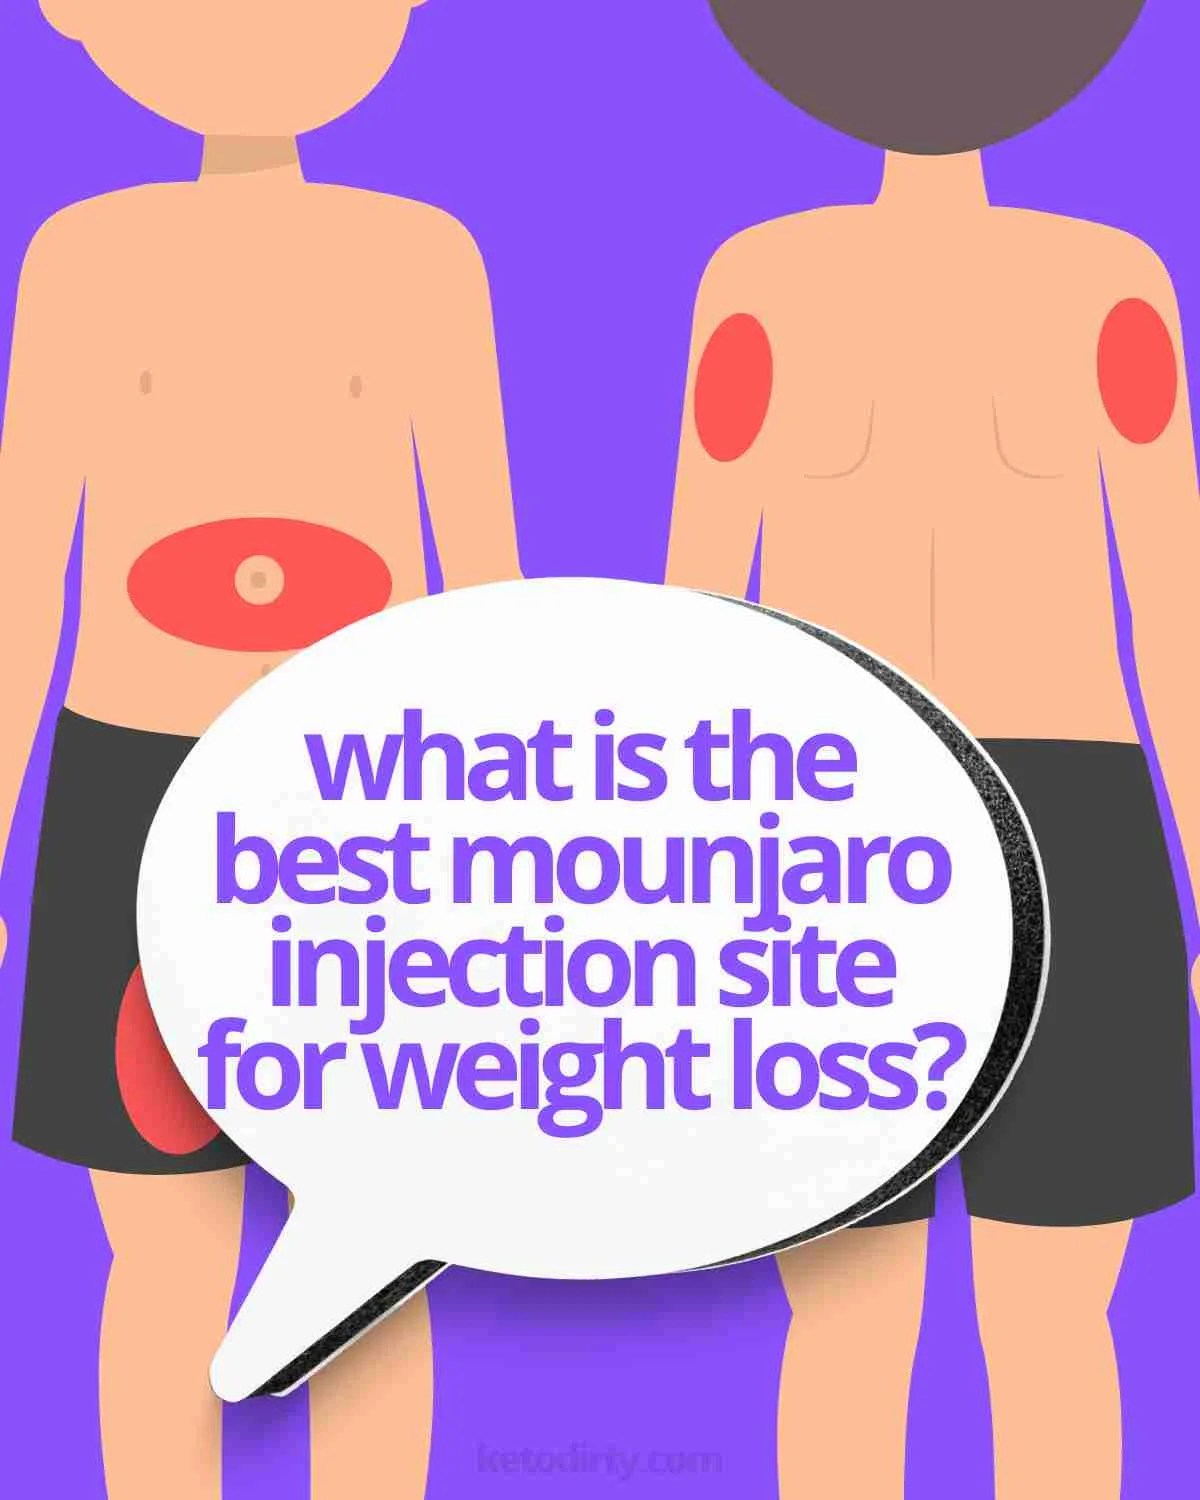 what is the best mounjaro injection site for weight loss?